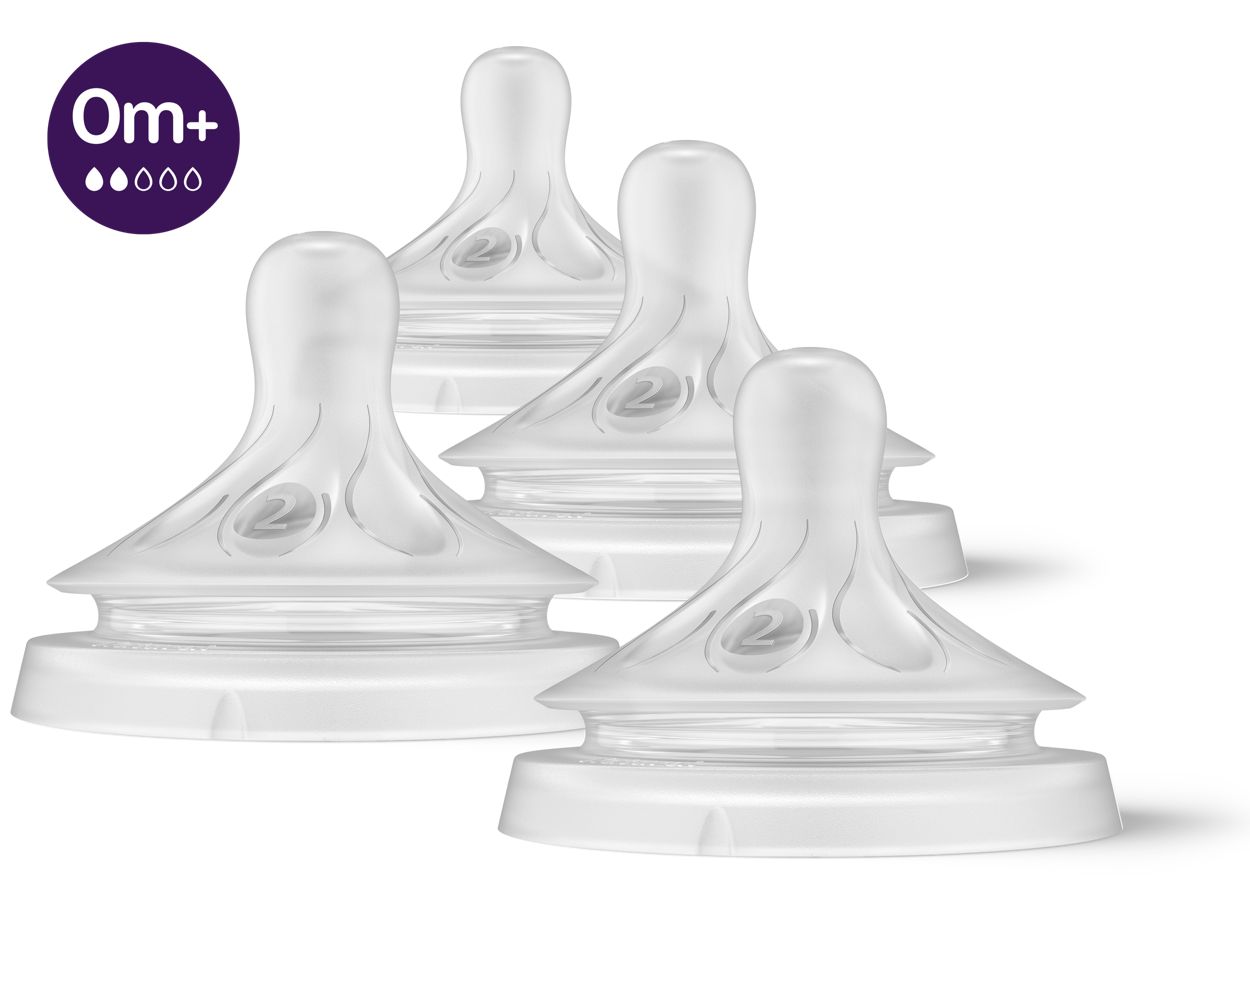 NEW Philips Avent Natural Baby Newborn Flow Bottle Nipples 0m+/2 Nipples